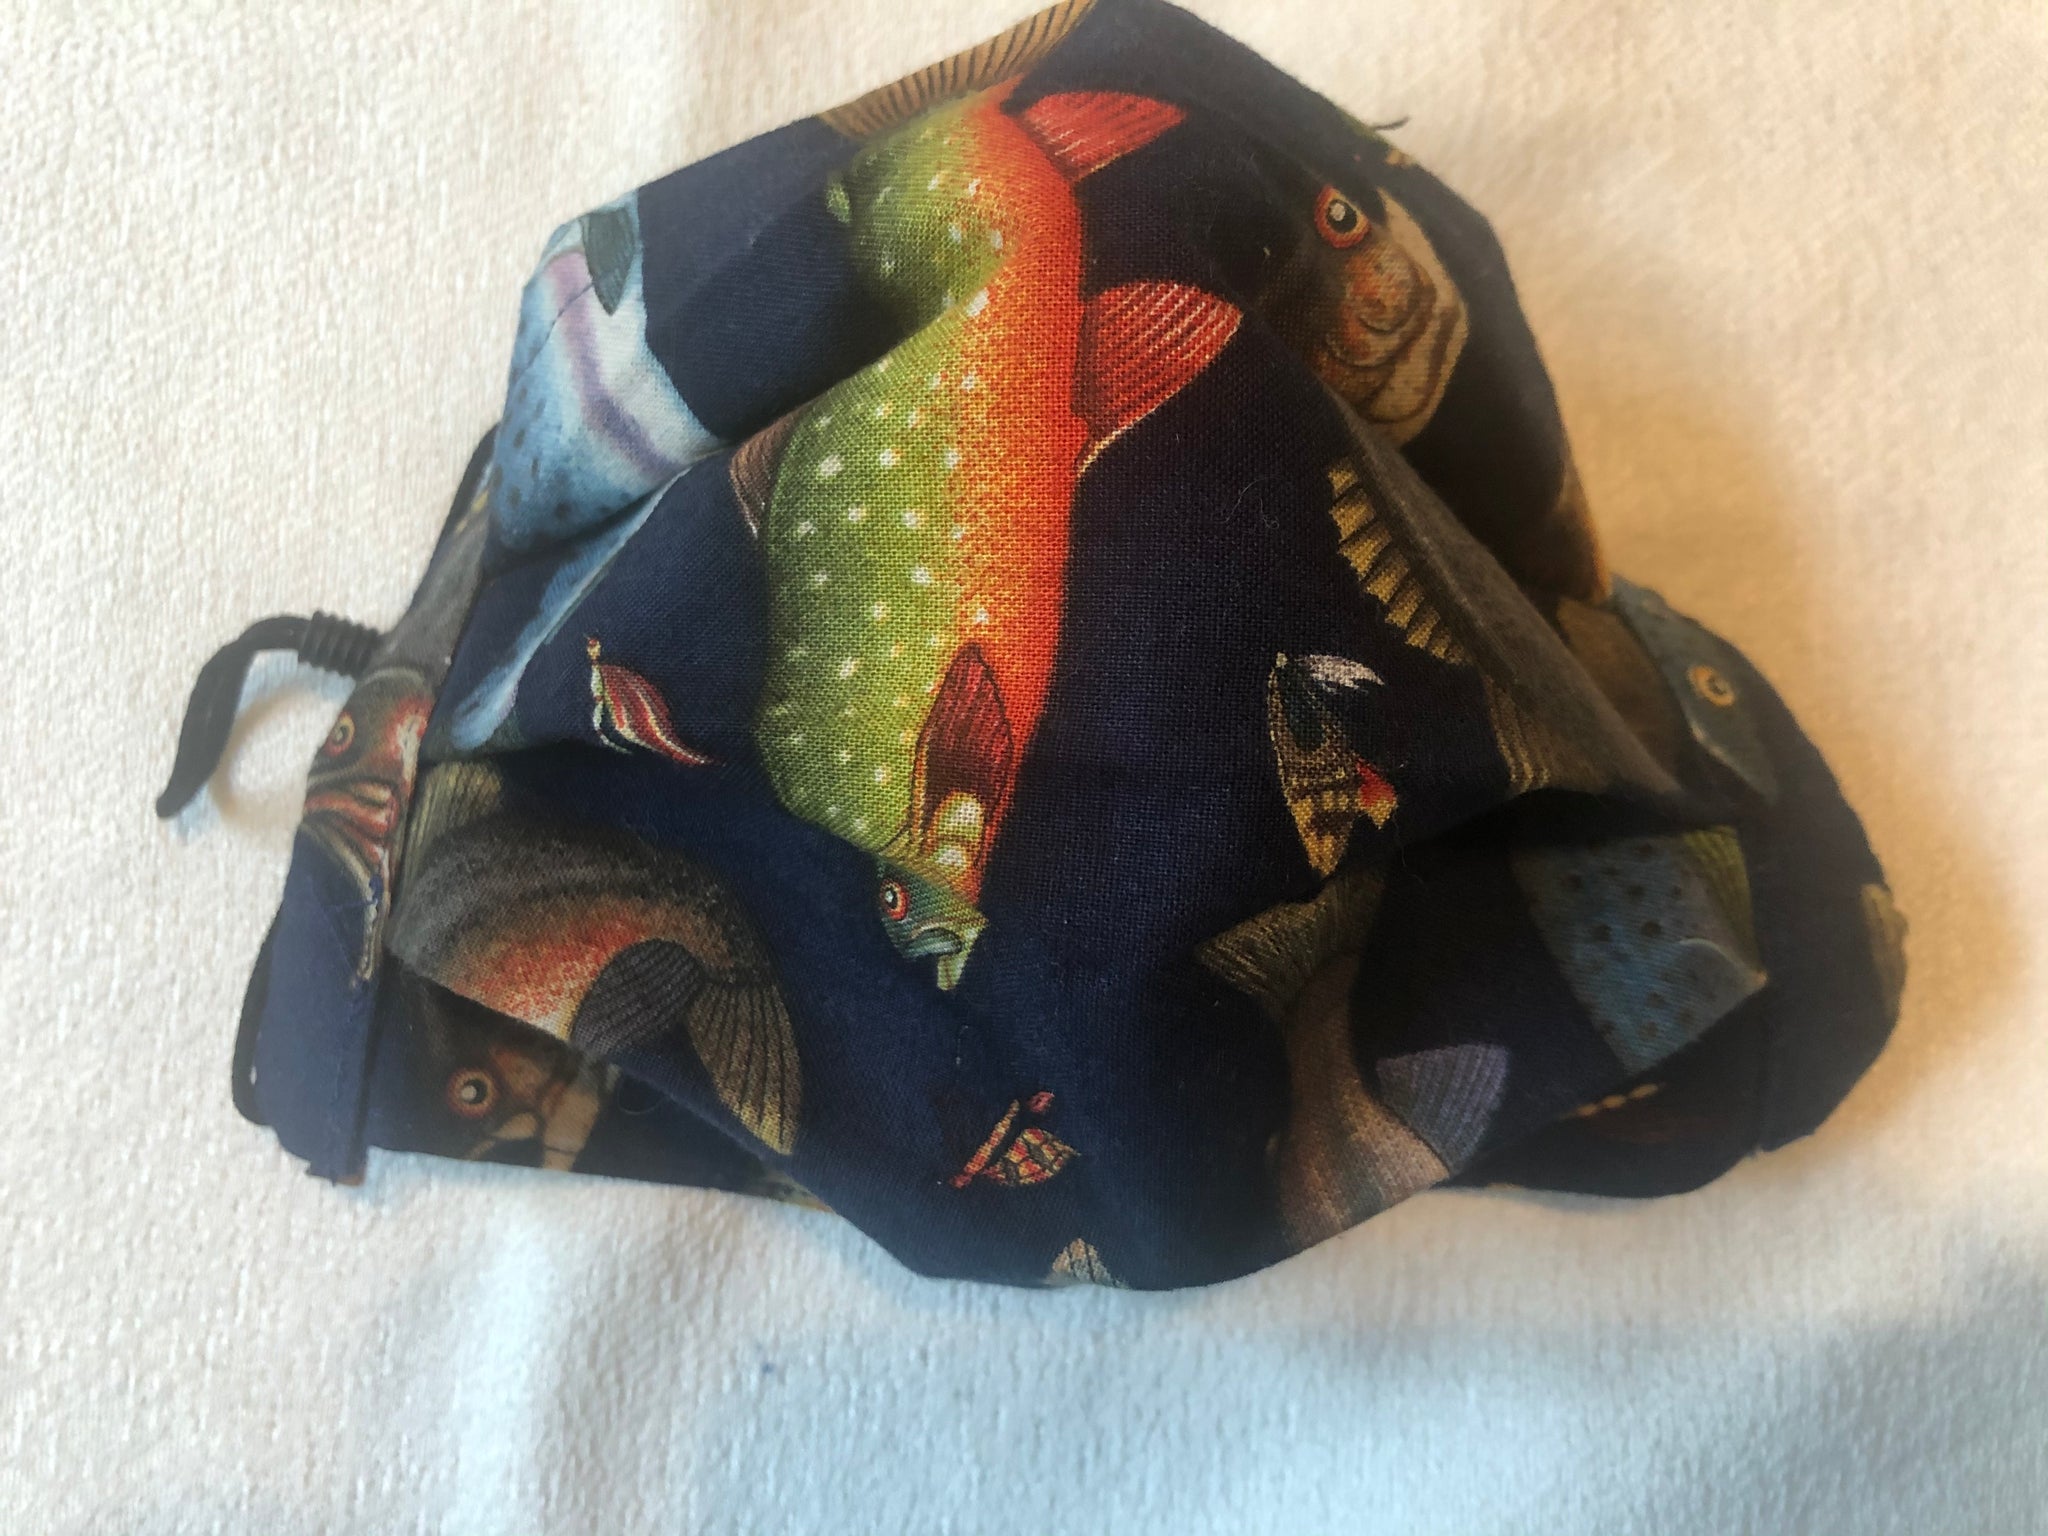 Swimming Downstream Fish, nose wire, filter pocket, adjustable ear ties